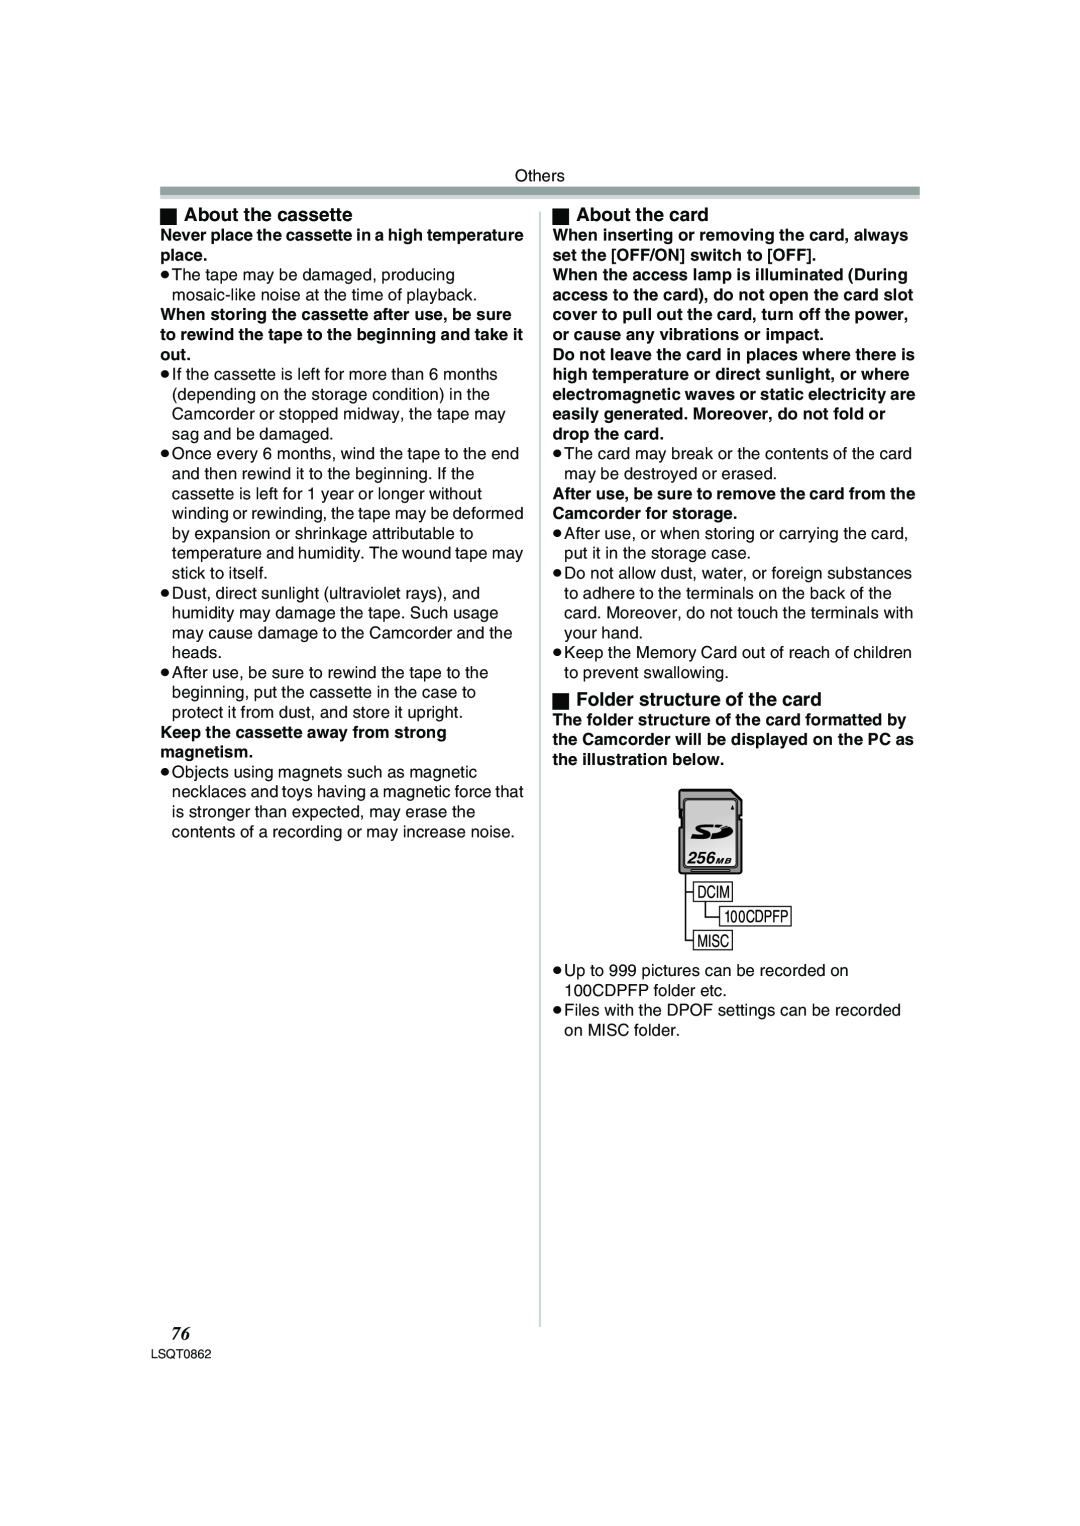 Panasonic PV-GS250 operating instructions ª About the cassette, ª About the card, ª Folder structure of the card 